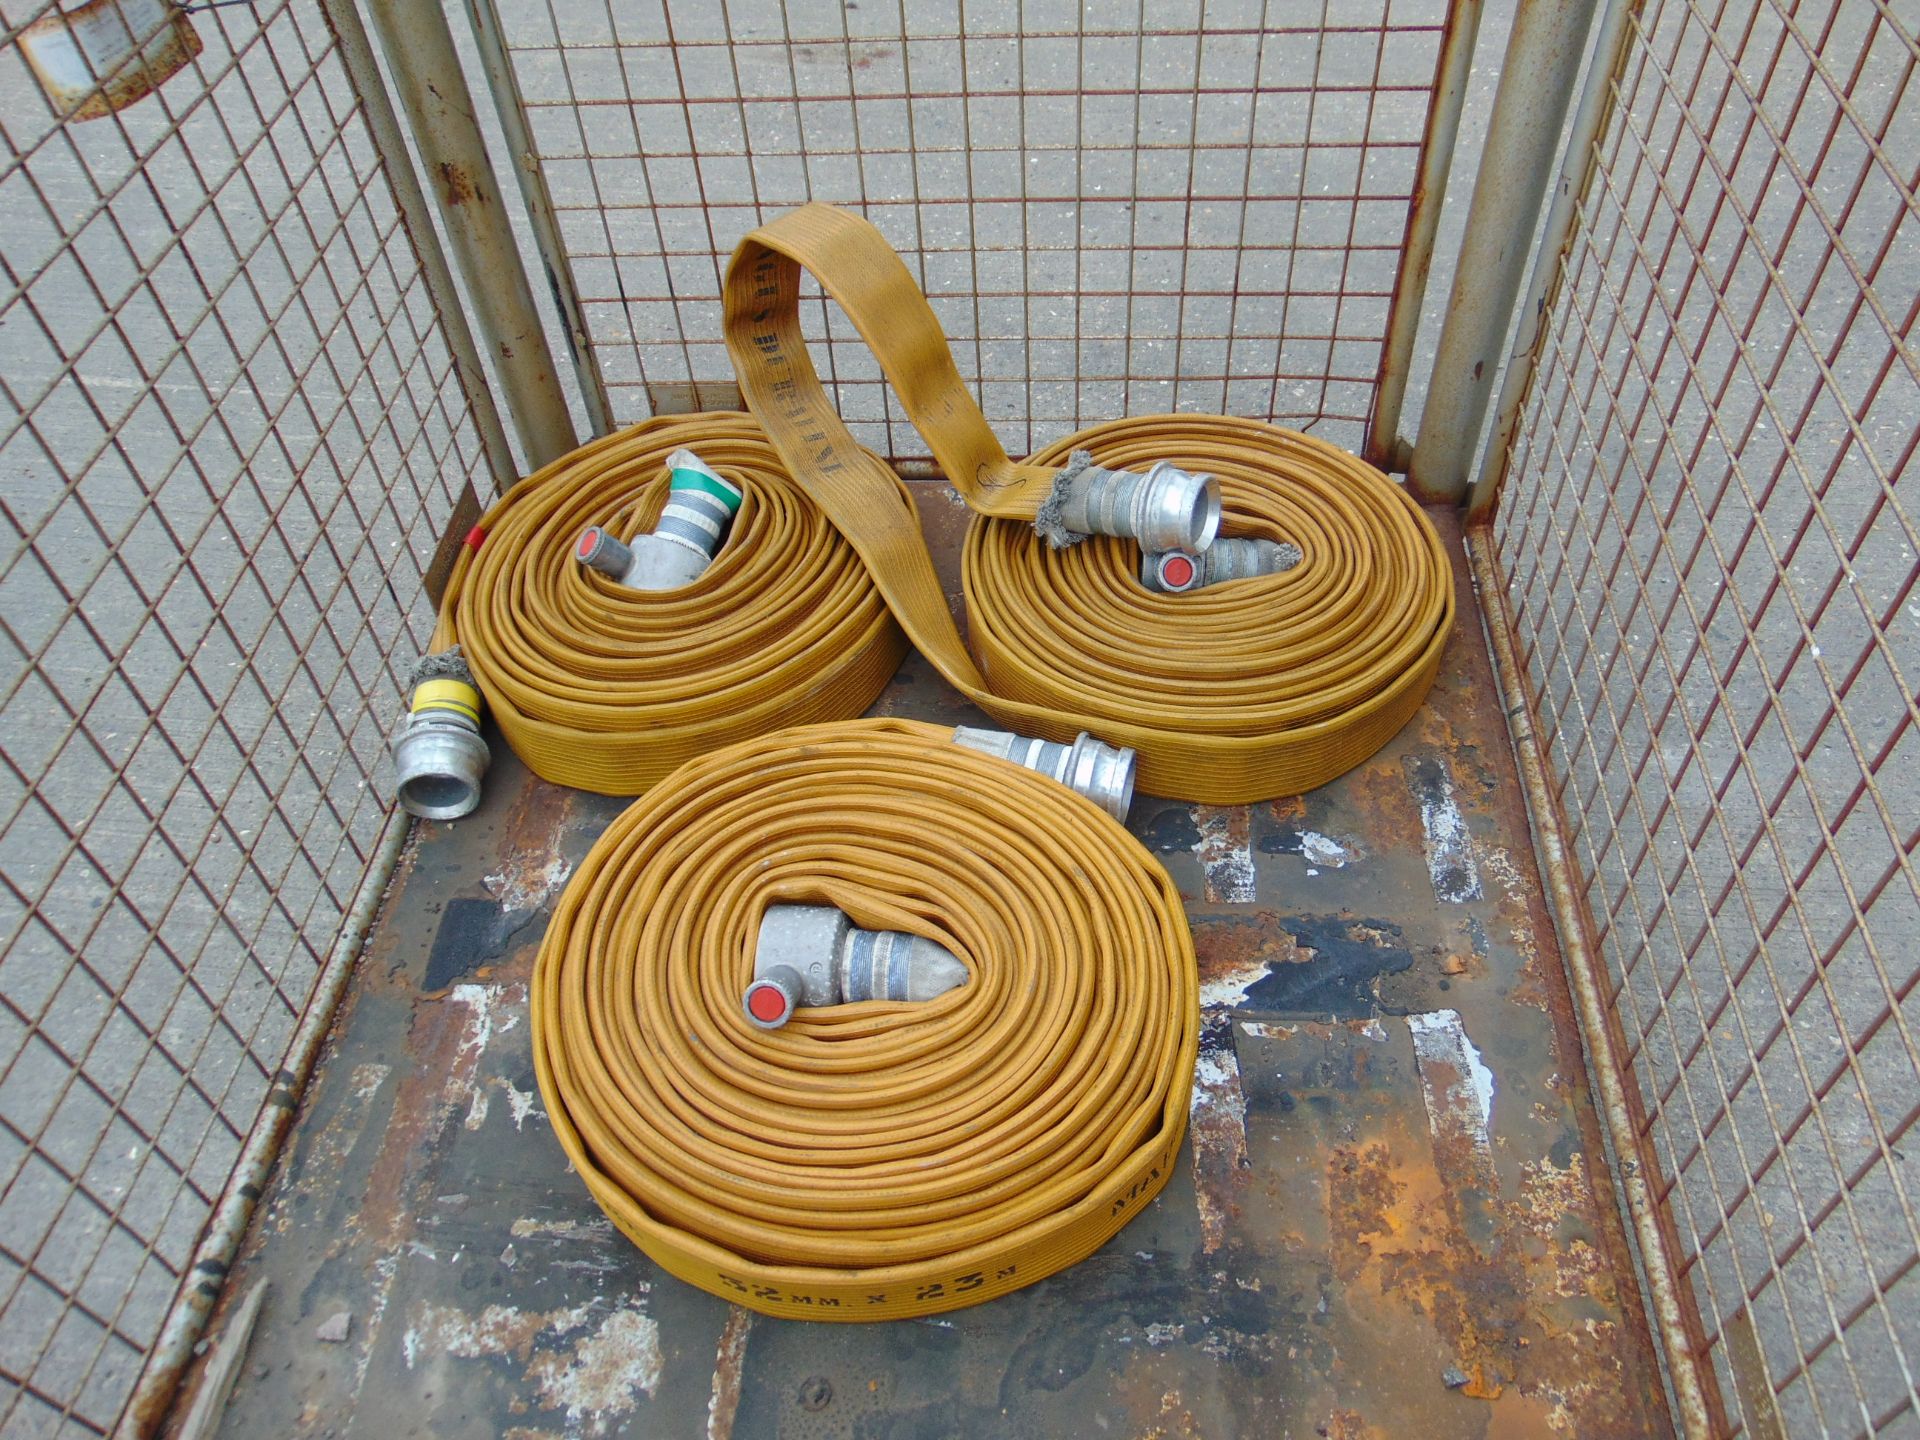 3 x Angus 52mm x 23m Layflat Fire Hoses with Couplings - Image 2 of 4